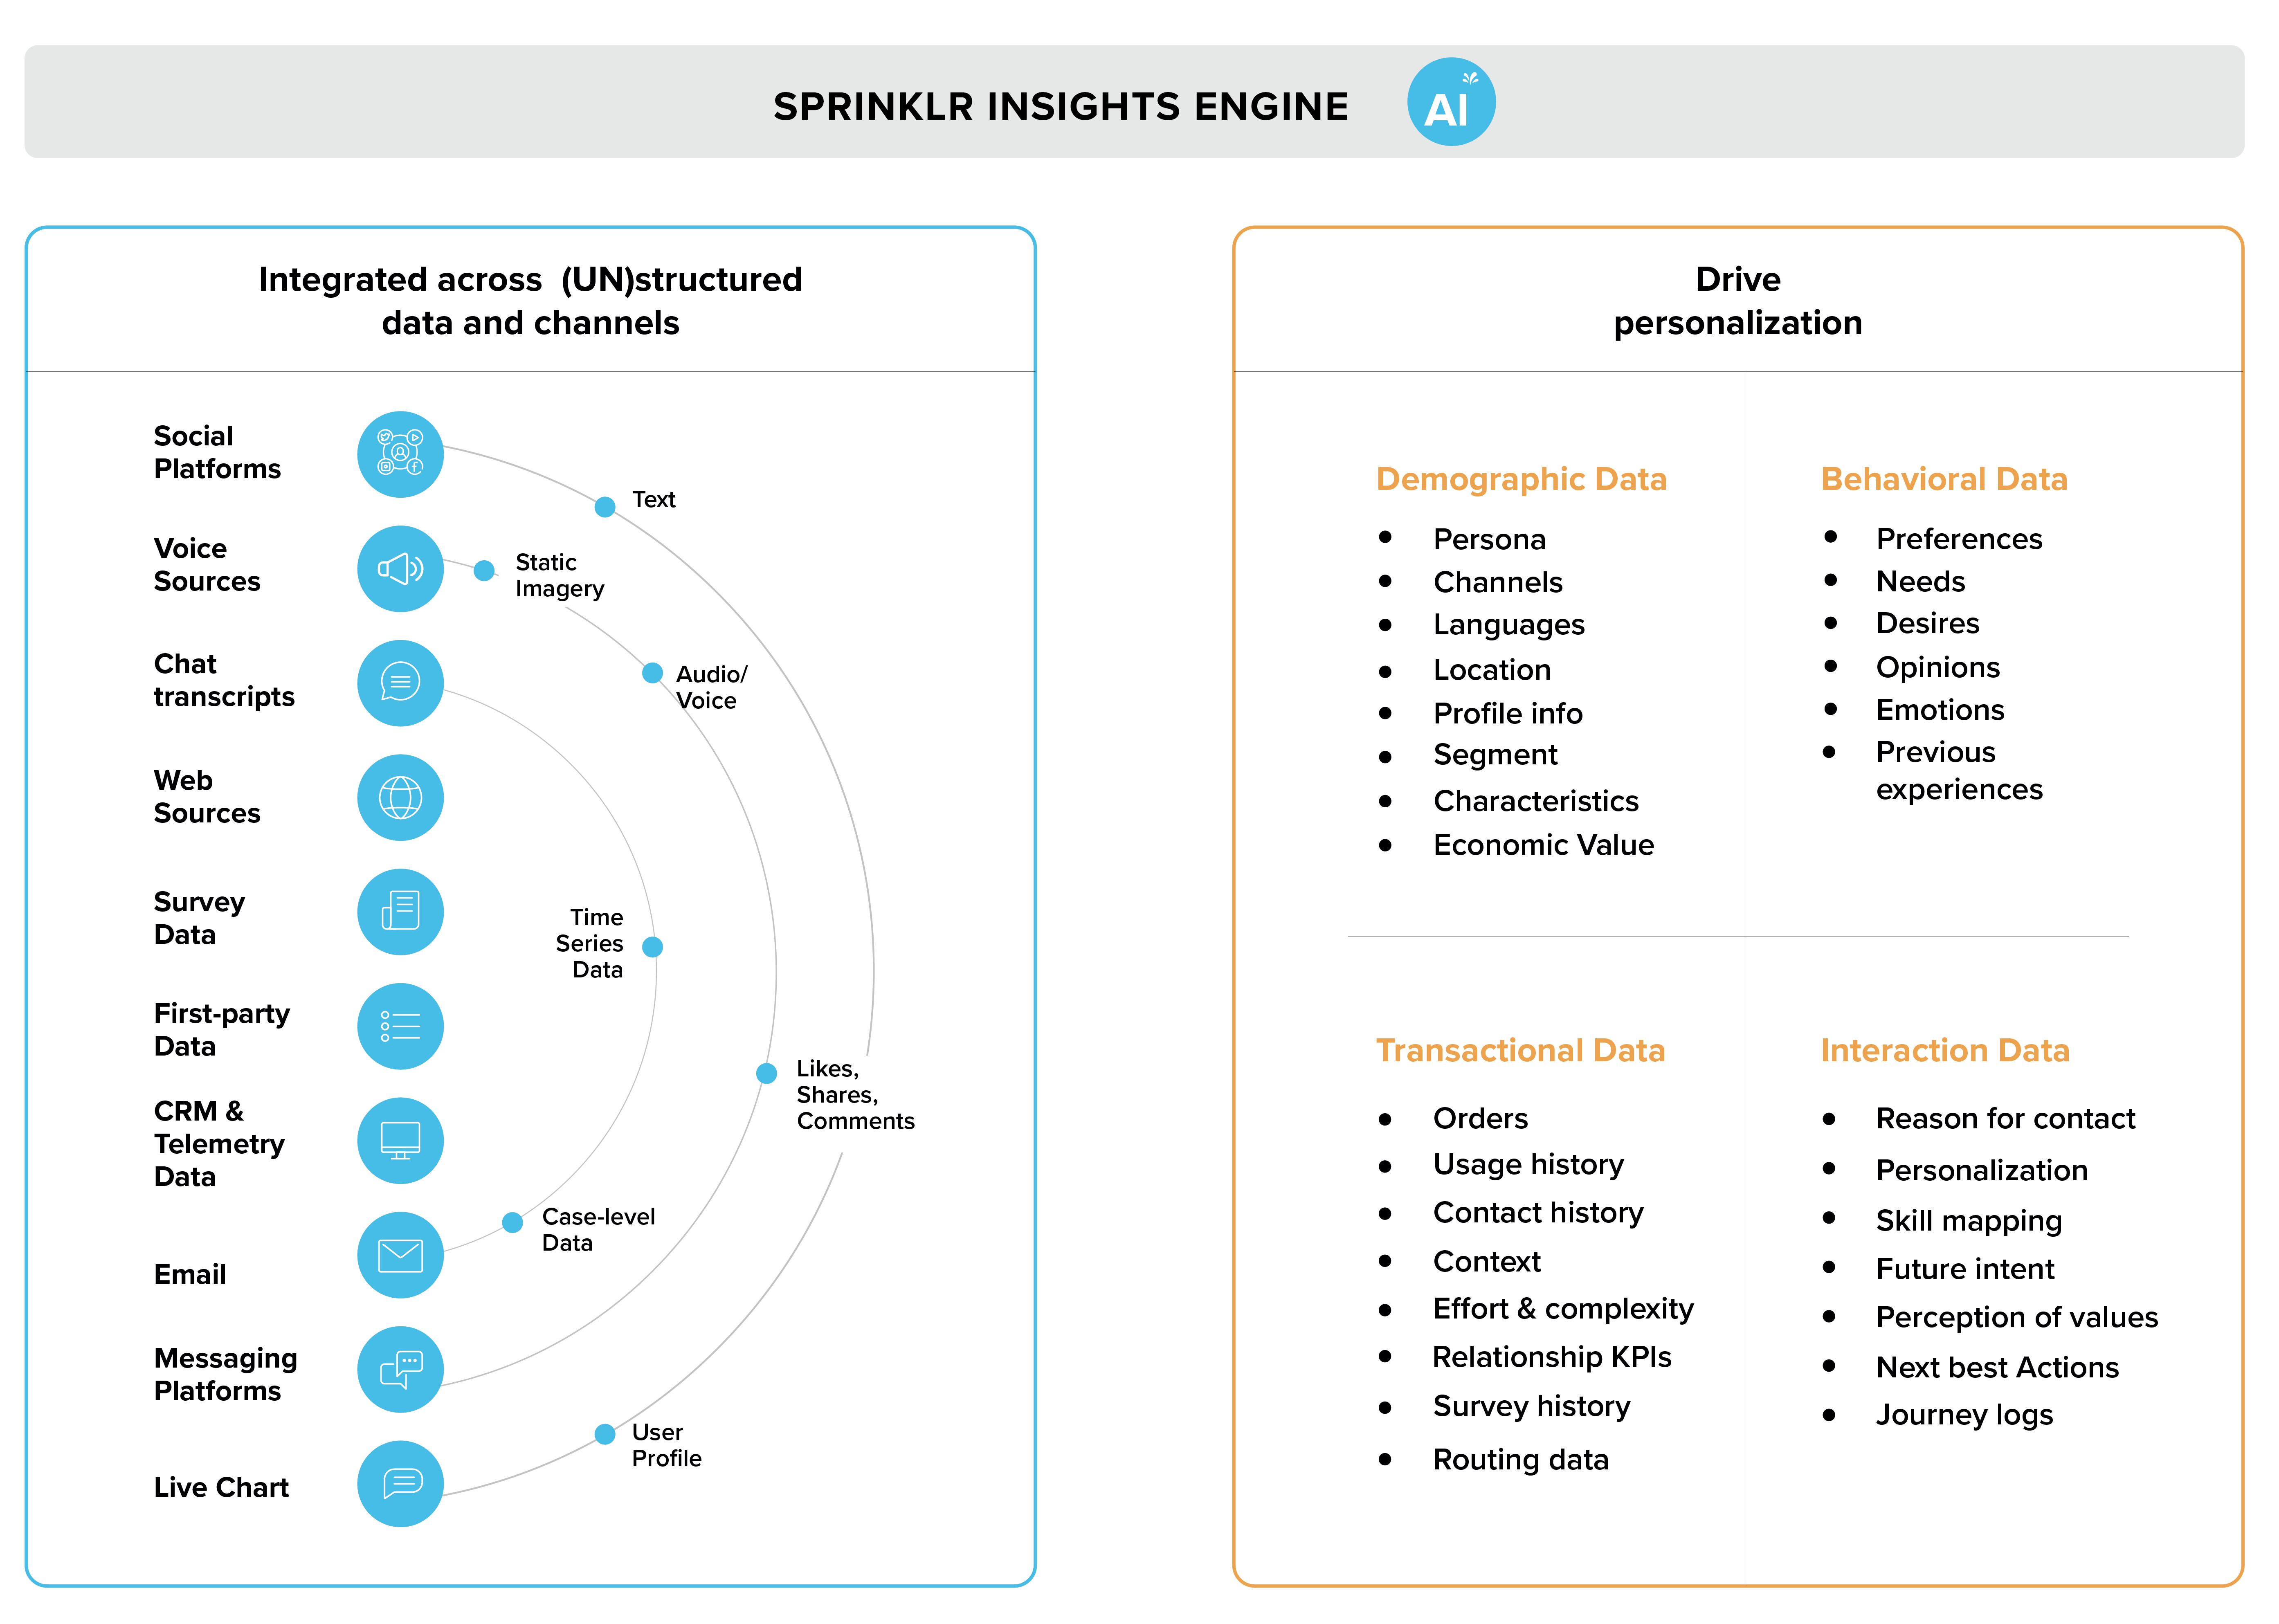 An image showing how Sprinklr Insights Engine integrates across channels to drive personalization